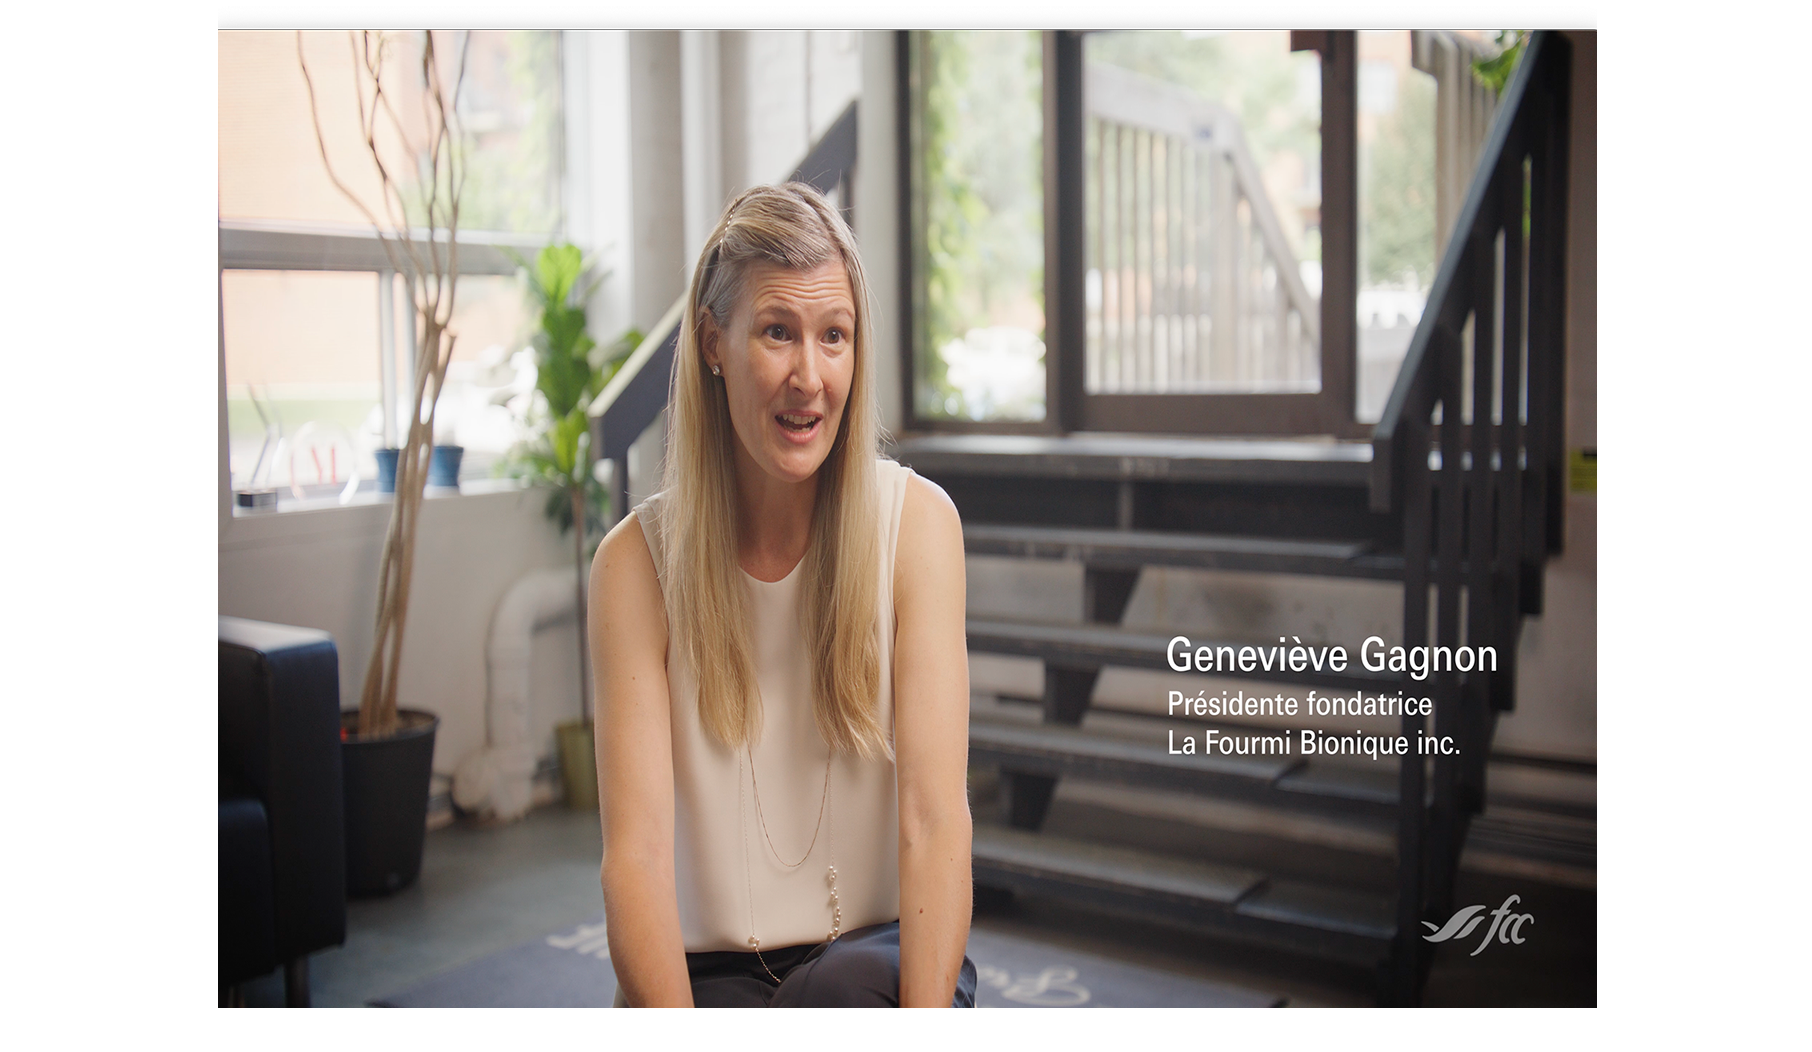 As part of FCC's content marketing Food and Beverage Stories video series, we conducted an interview with Geneviève Gagnon, the founder of agfood company La Fourmi Bionique.